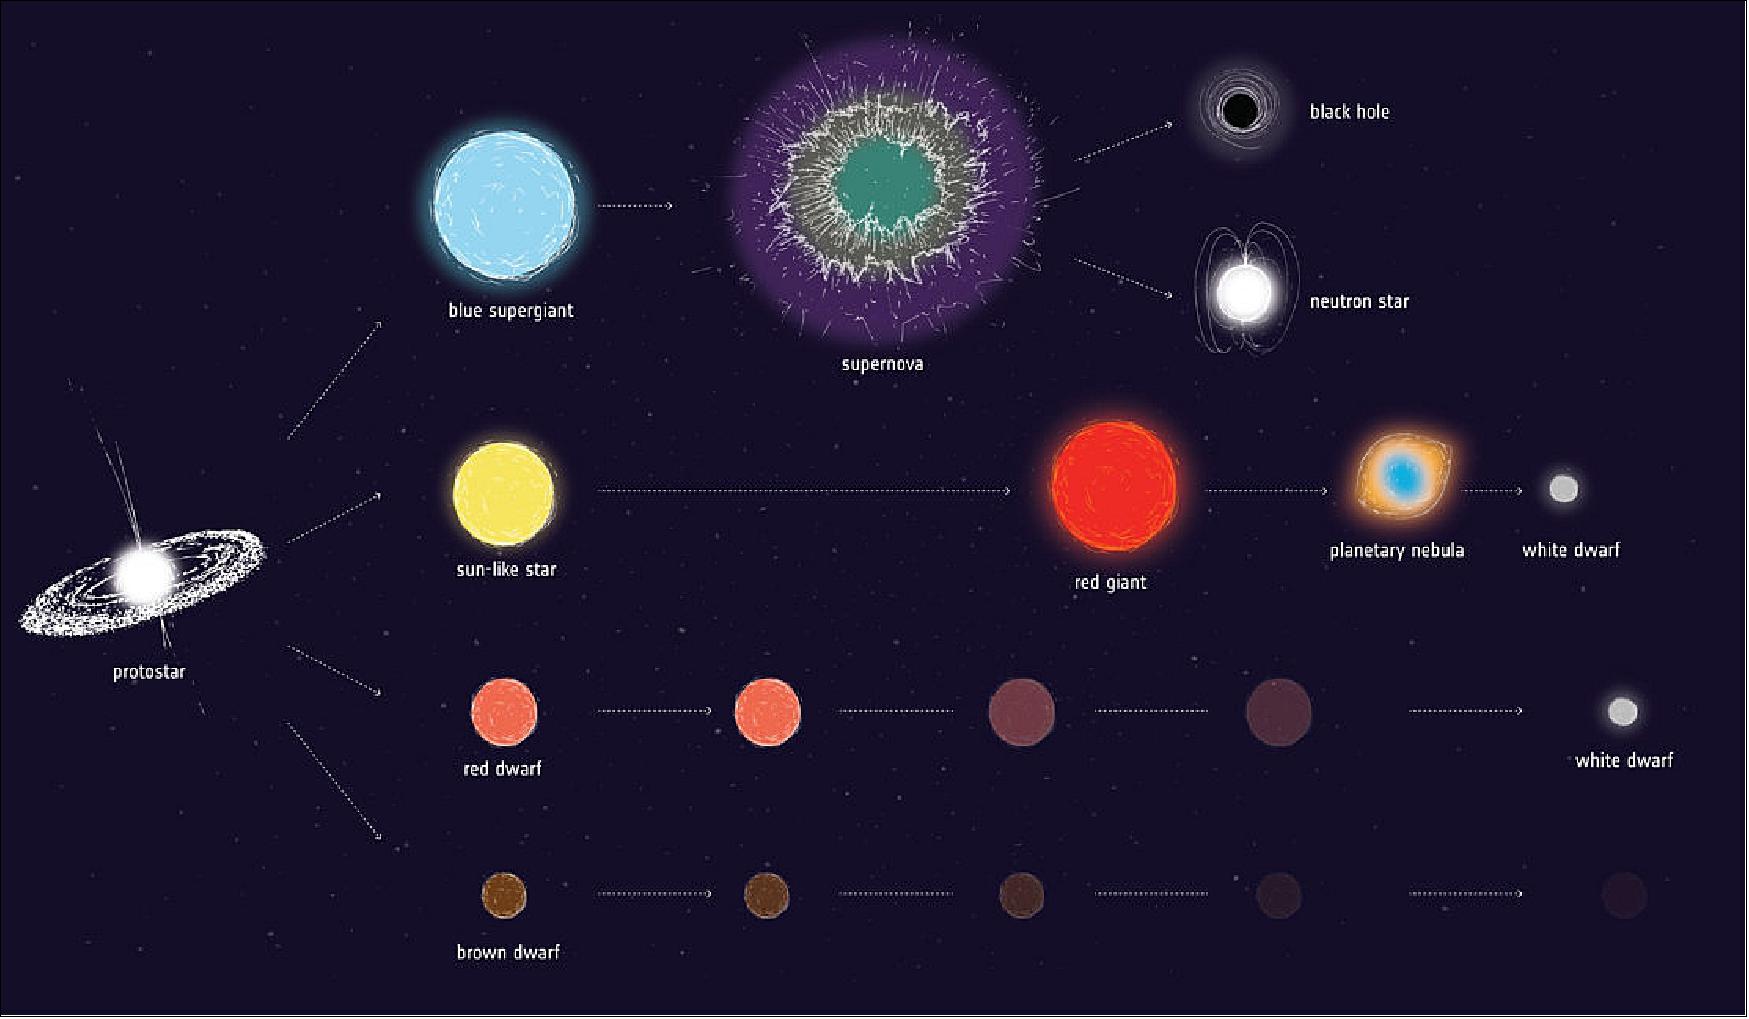 Figure 28: Stellar evolution: Artist impression of some possible evolutionary pathways for stars of different initial masses. Some proto-stars, brown dwarfs, never actually get hot enough to ignite into fully-fledged stars, and simply cool off and fade away. Red dwarfs, the most common type of star, keep burning until they have transformed all their hydrogen into helium, turning into a white dwarf. Sun-like stars swell into red giants before puffing away their outer shells into colorful nebula while their cores collapse into a white dwarf. The most massive stars collapse abruptly once they have burned through their fuel, triggering a supernova explosion or gamma-ray burst, and leaving behind a neutron star or black hole (image credit: ESA)